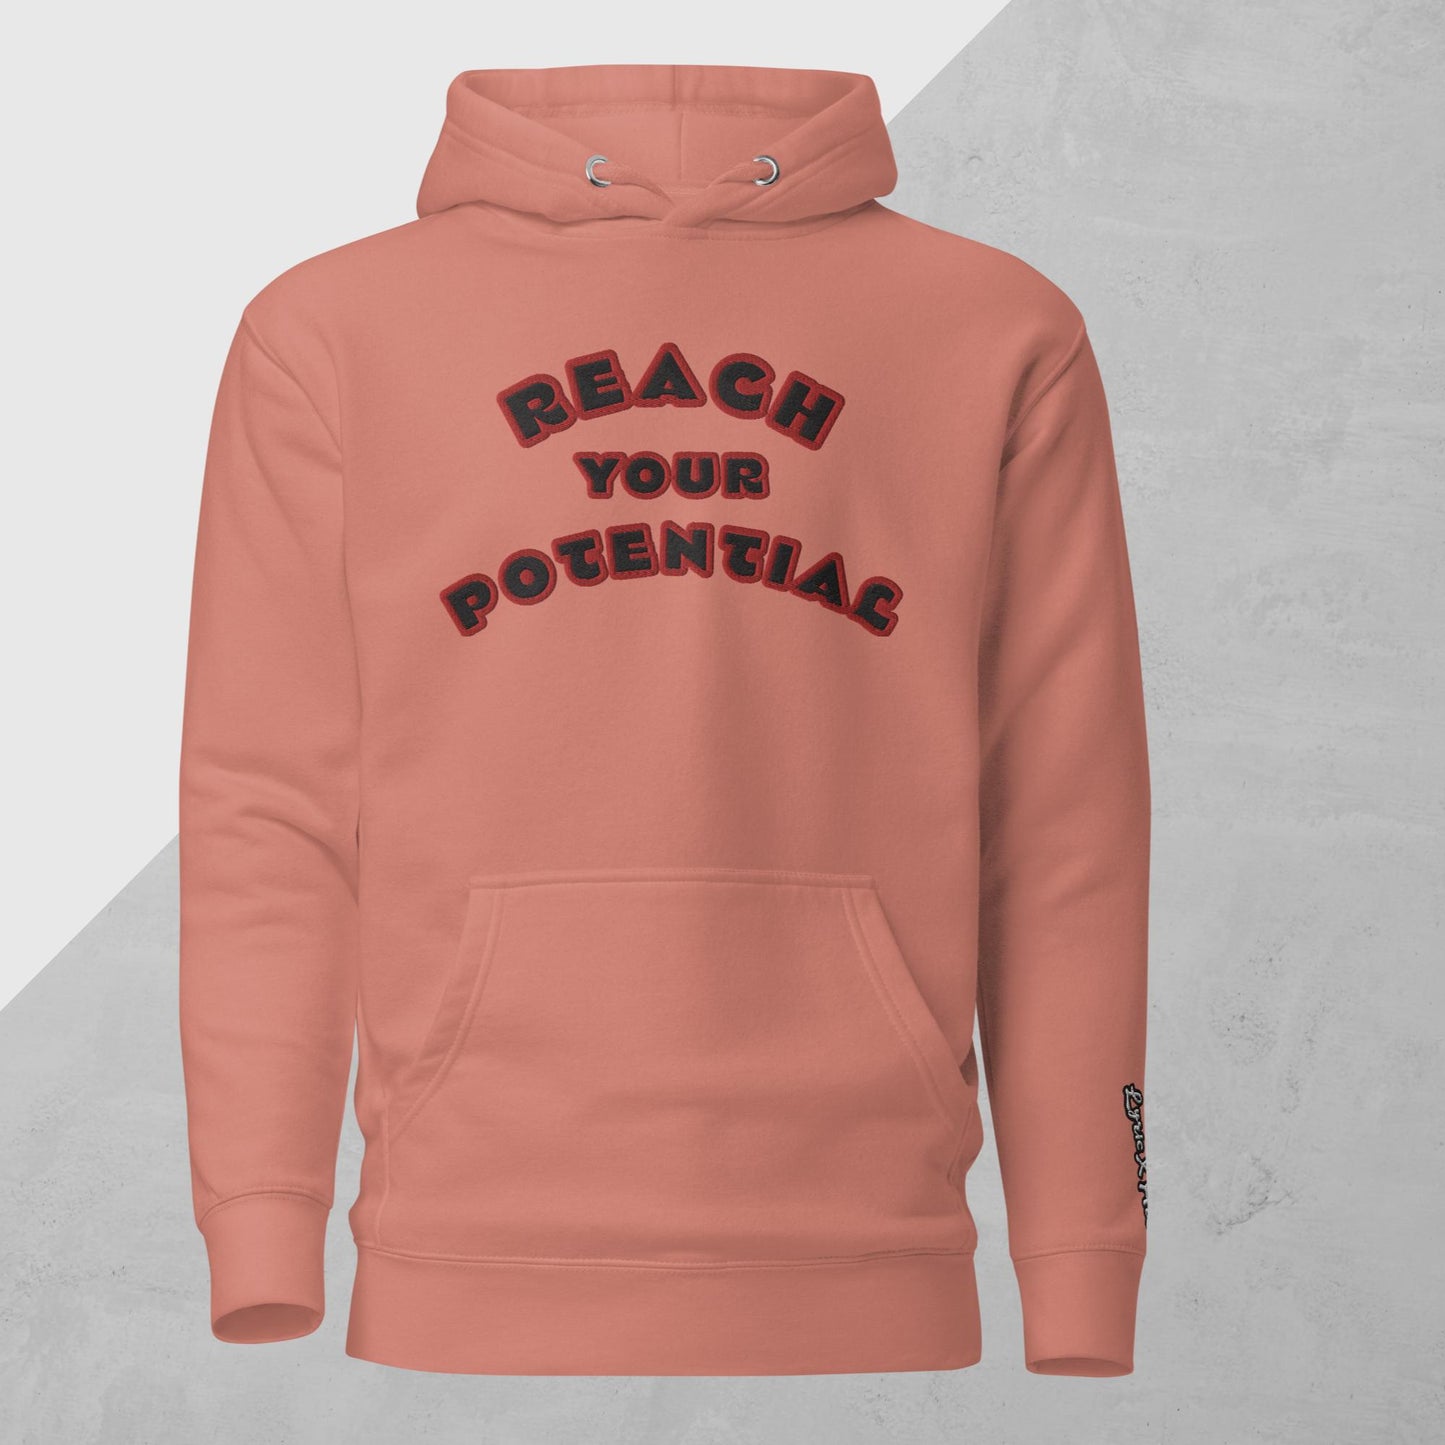 Reach Your Potential Hoodie - lyricxart